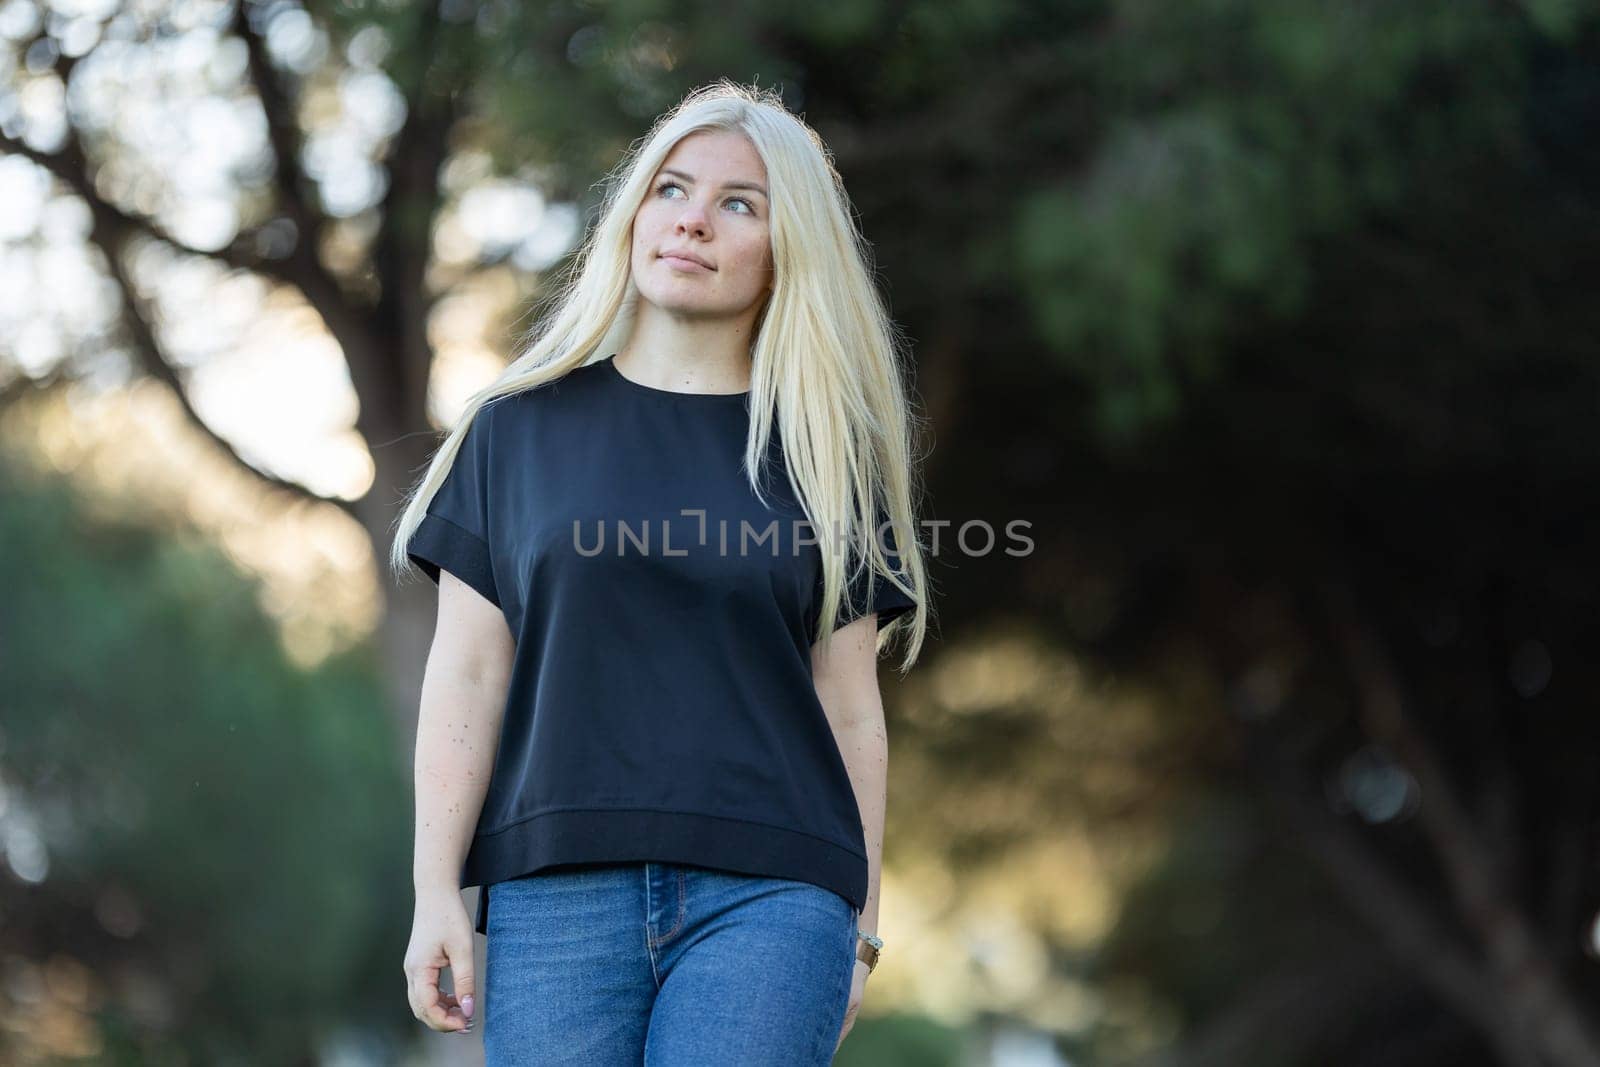 Young Woman With Blonde Hair Standing in Park by Studia72